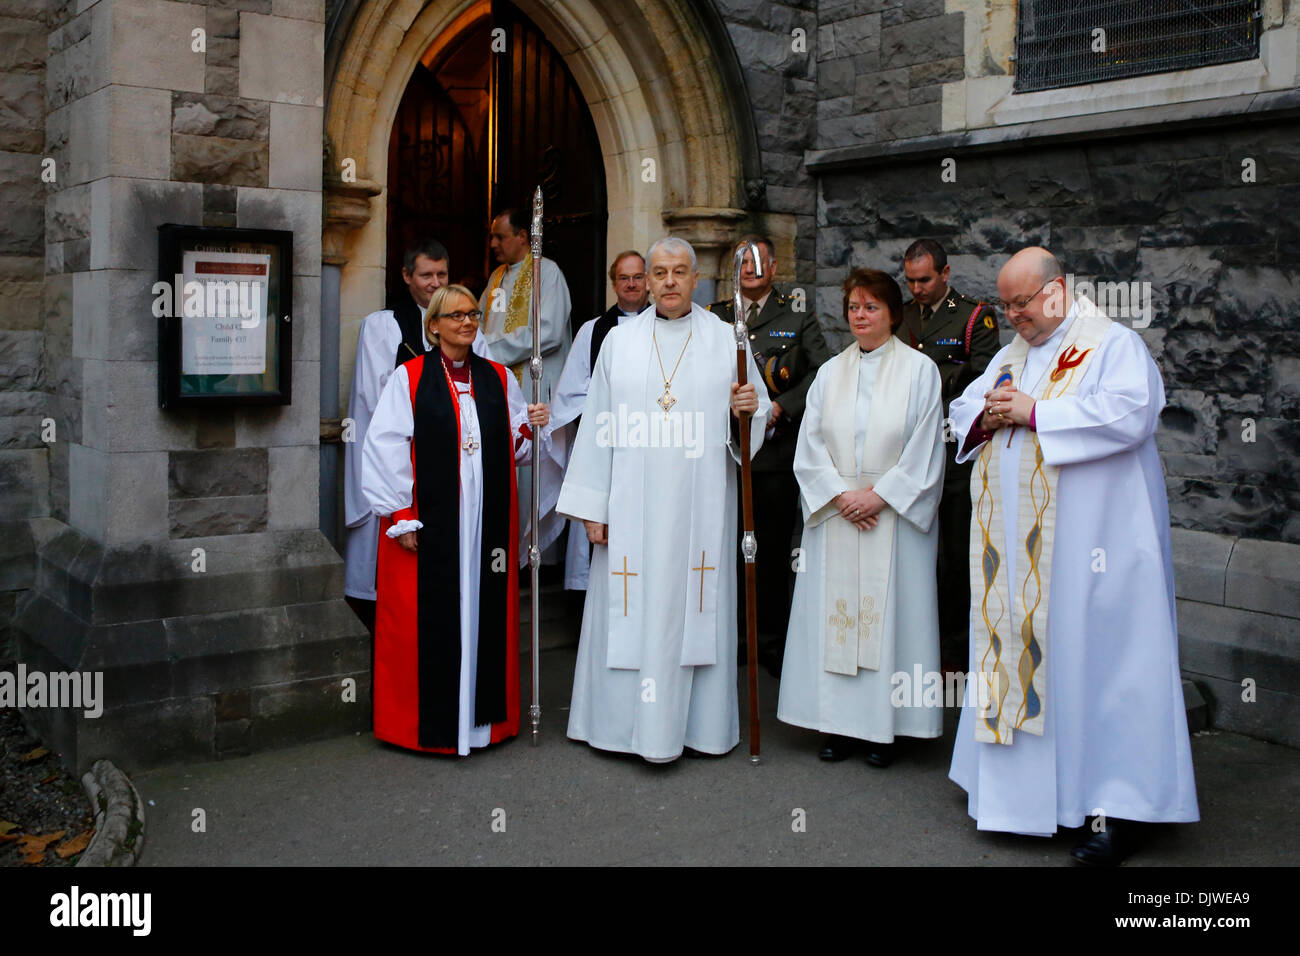 Dublin, Ireland. 30th November 2013. The Bishop of Meath and Kildare the Most Revd Pat Storey (L) is pictured with the Archbishop of Dublin, the Most Revd Dr Michael Jackson (2 L) and the Bishop of Cork, Cloyne and Ross, The Right Revd Paul Colton (R) outside Christ Church Cathedral. The Most Revd Pat Storey has been consecrated as Church of Ireland Bishop of Meath and Kildare in Dublin's Christ Church Cathedral. Credit:  Michael Debets/Alamy Live News Stock Photo